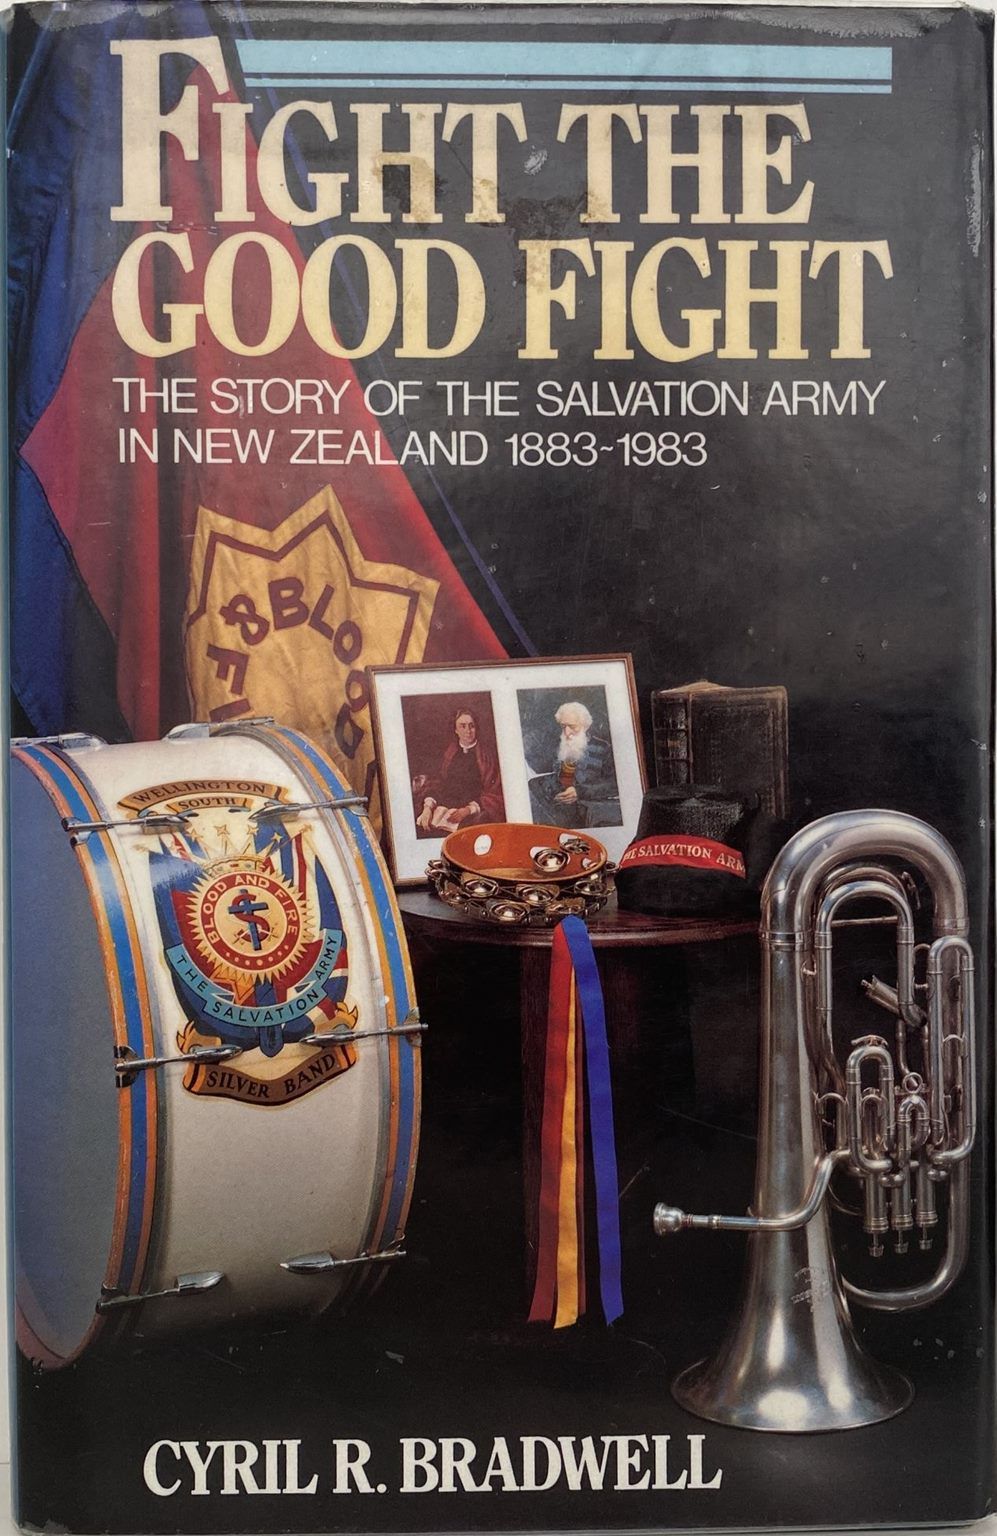 FIGHT THE GOOD FIGHT: The Salvation Army in New Zealand 1883-1983